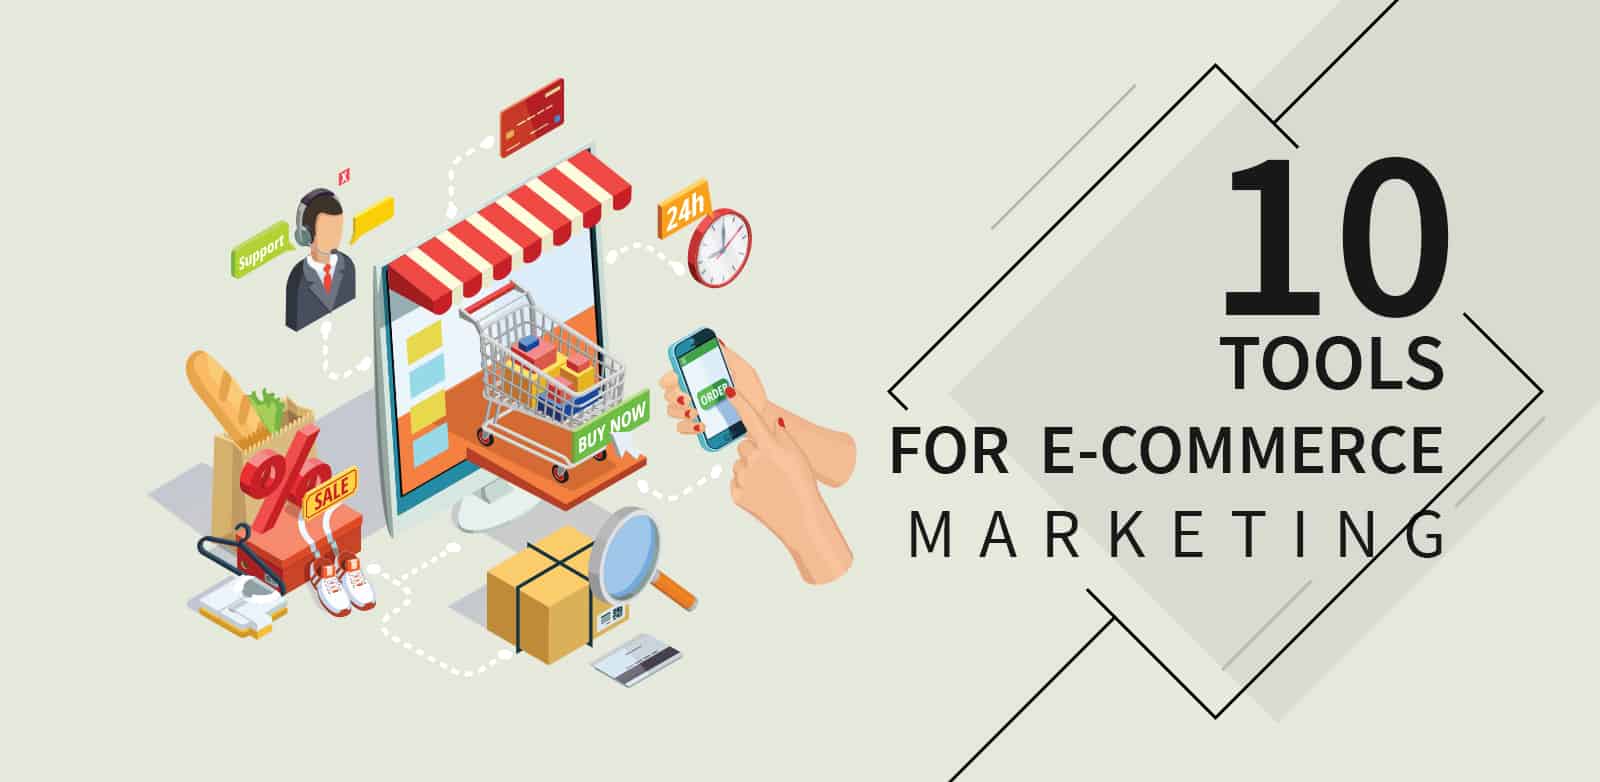 Tools for E-commerce Marketing